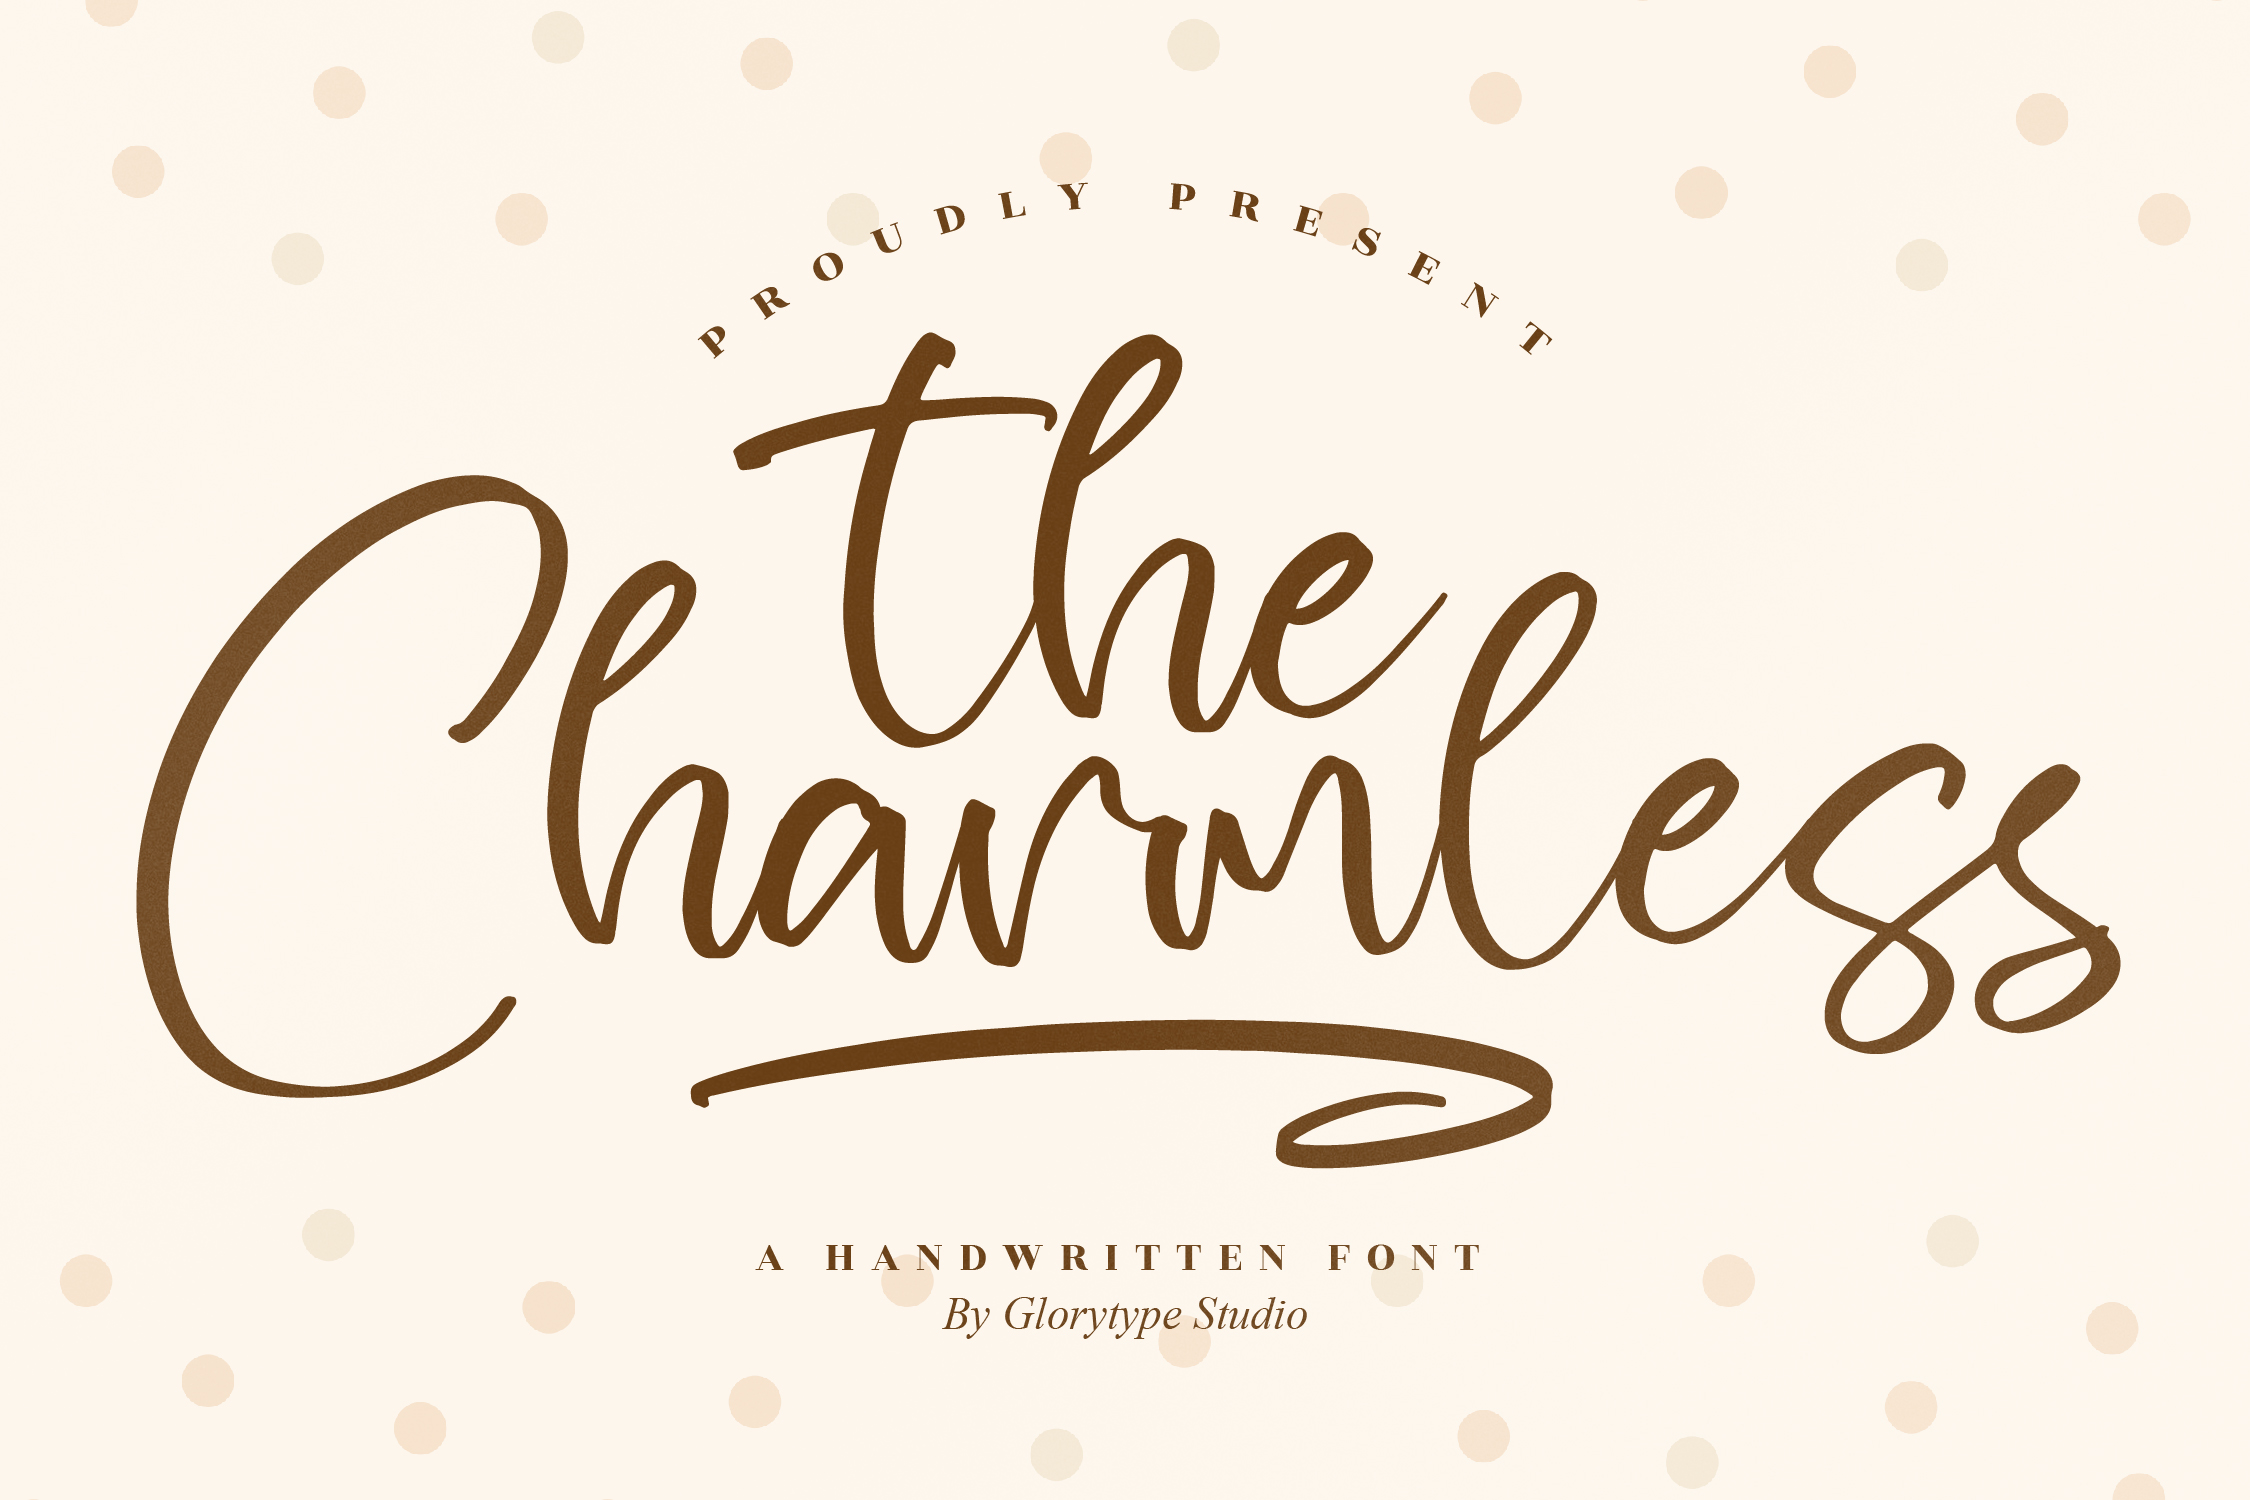 The Charmless Script Font